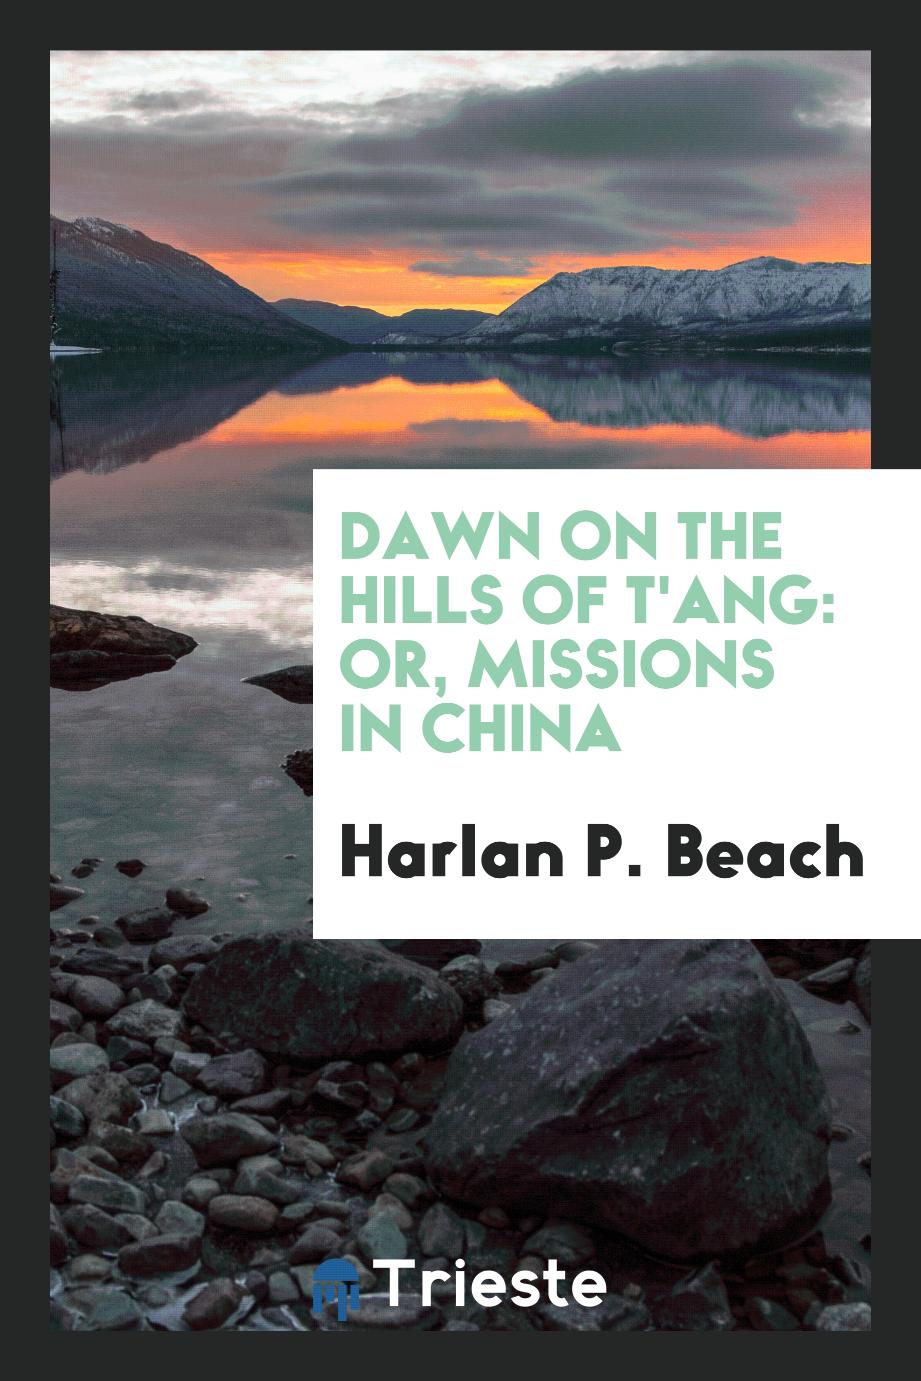 Dawn on the Hills of T'ang: Or, Missions in China